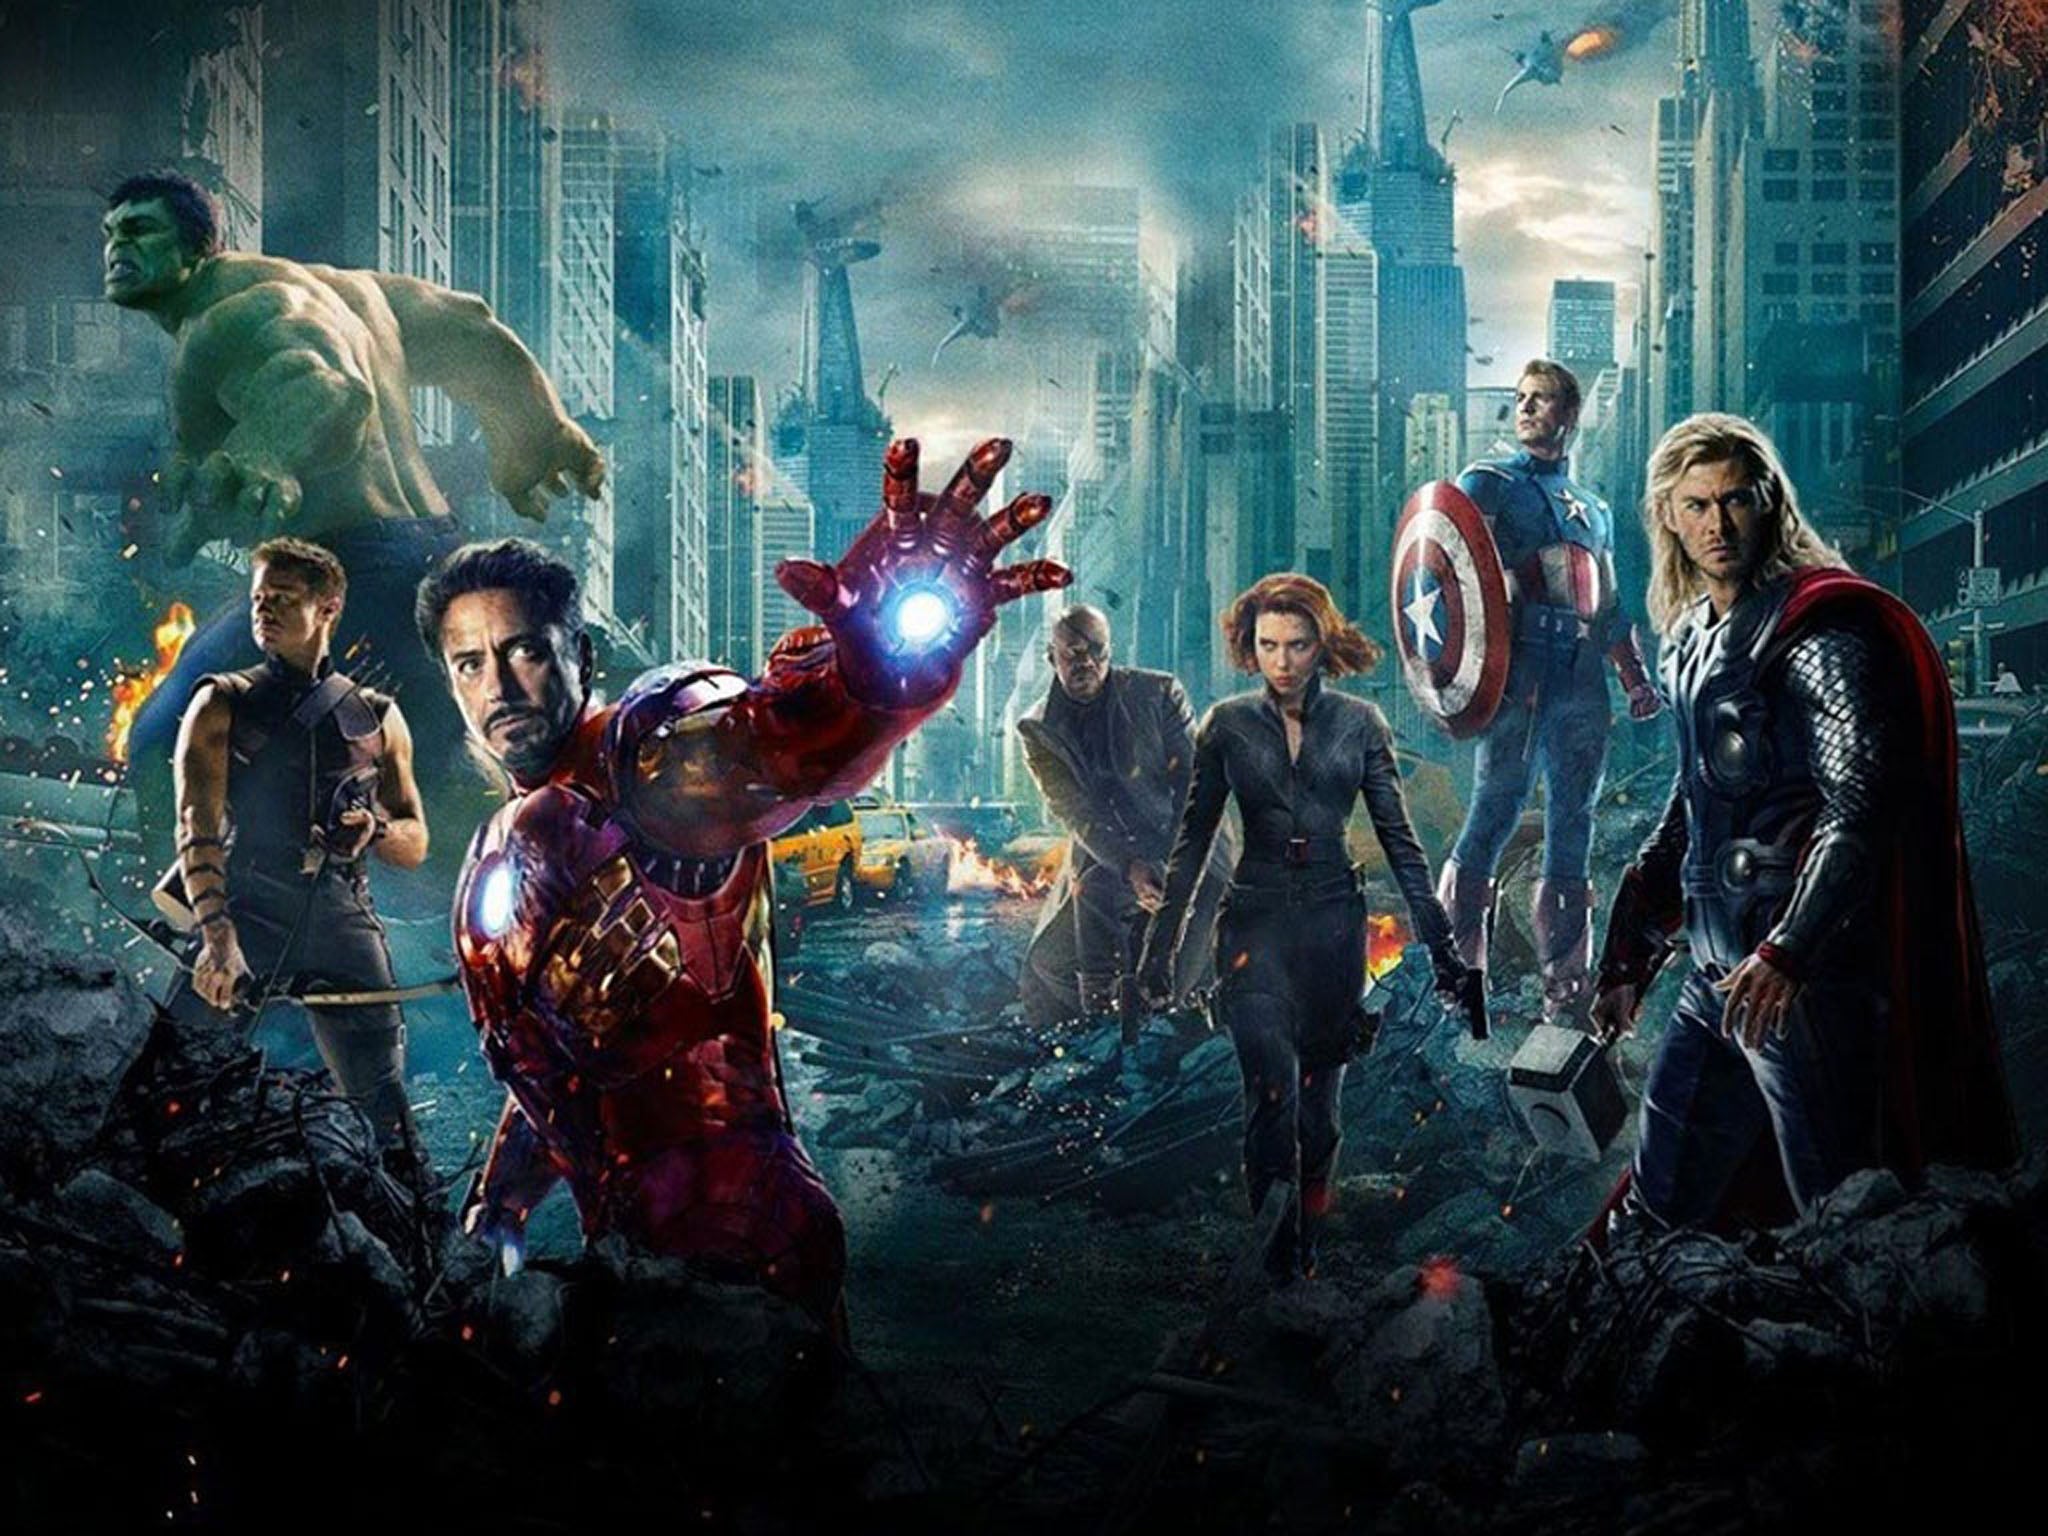 The Avengers films will reach UK cinemas ahead of the US